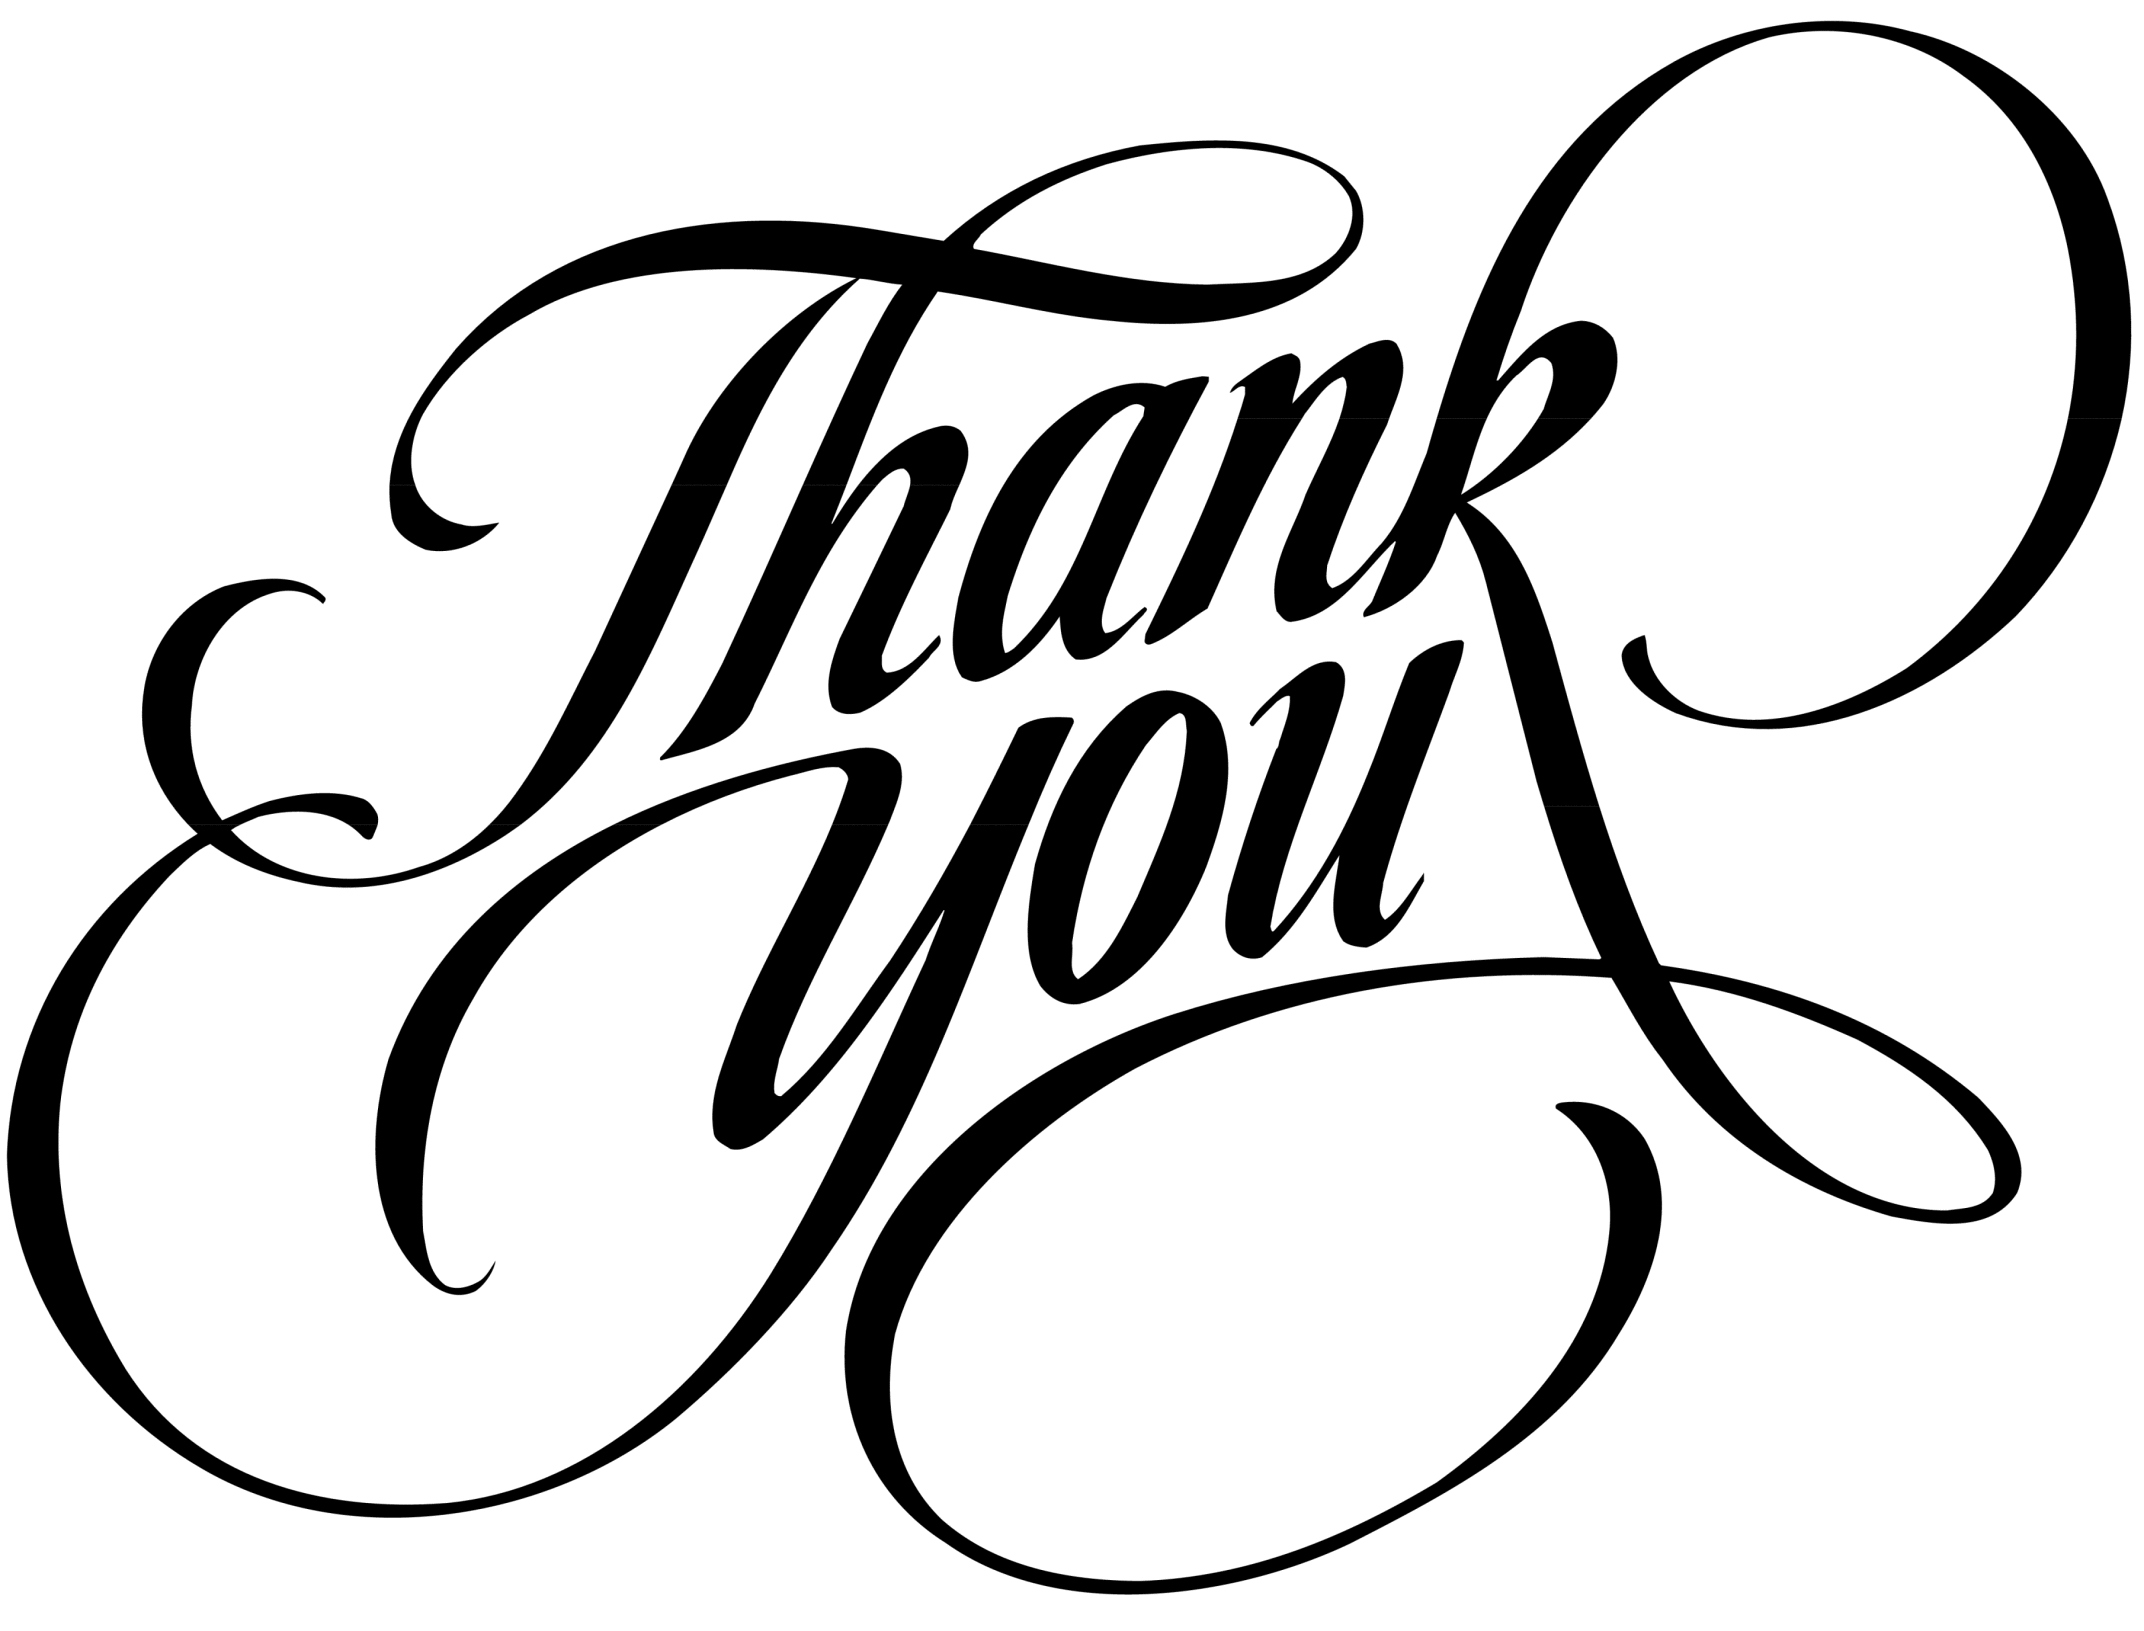 Thank You Images Black And White - HD Wallpaper 